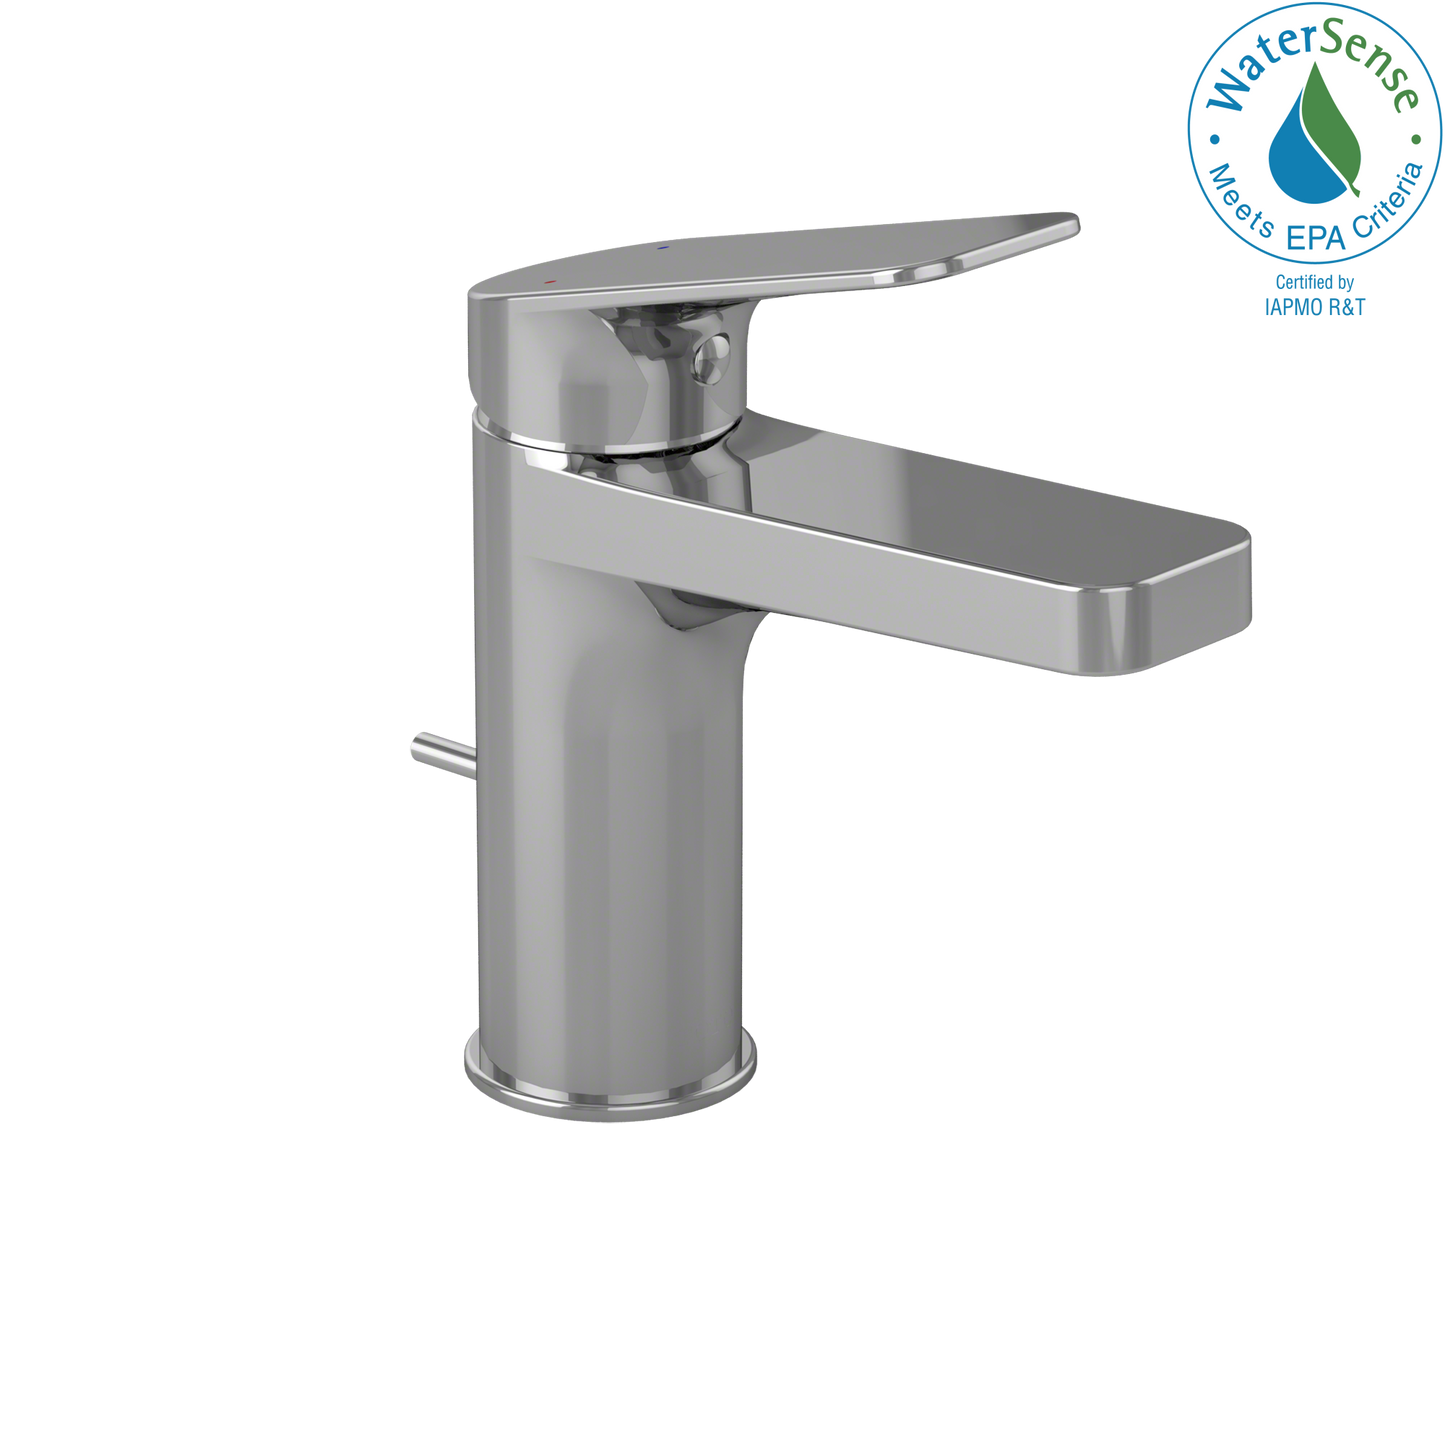 TOTO® Oberon® S Single Handle 1.2 GPM High-Efficiency Bathroom Sink Faucet, Polished Chrome - TL363SD12R#CP